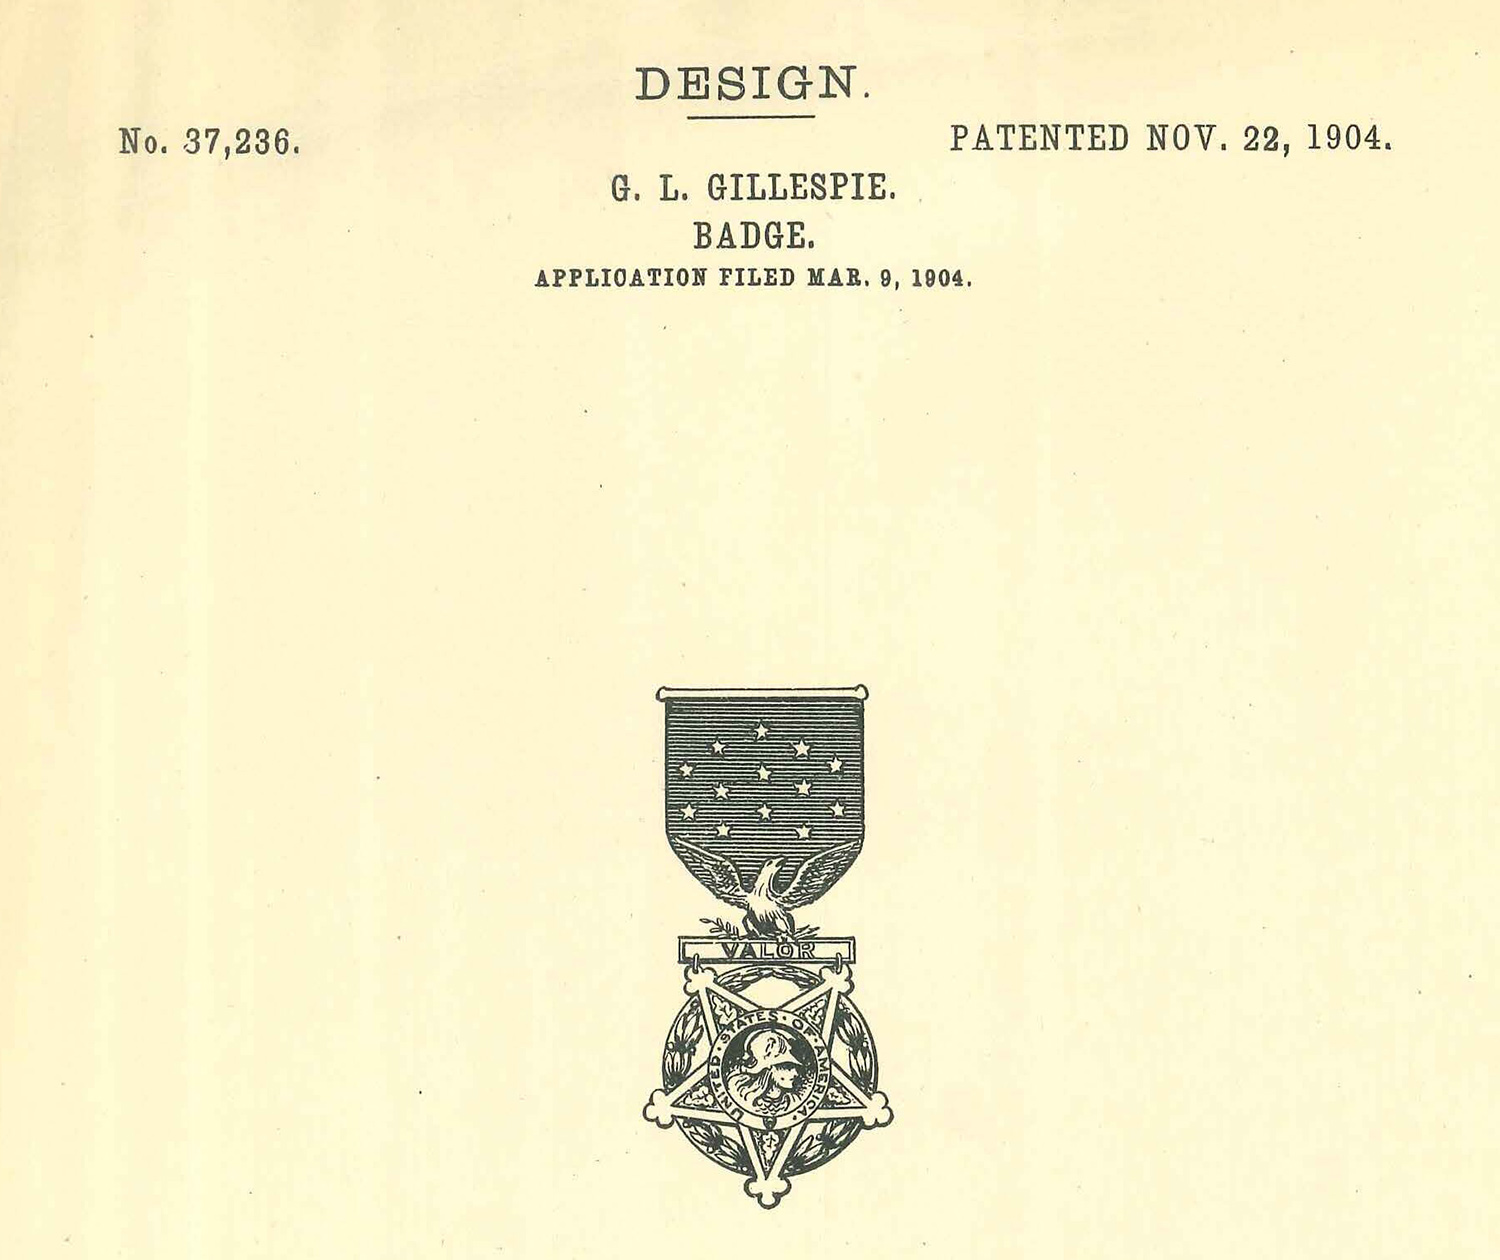 U.S. Patent No. 37,236 consisting of a drawing of a badge with a five pointed star suspended from a ribbon. Date on the patent is Nov. 22, 1904. 